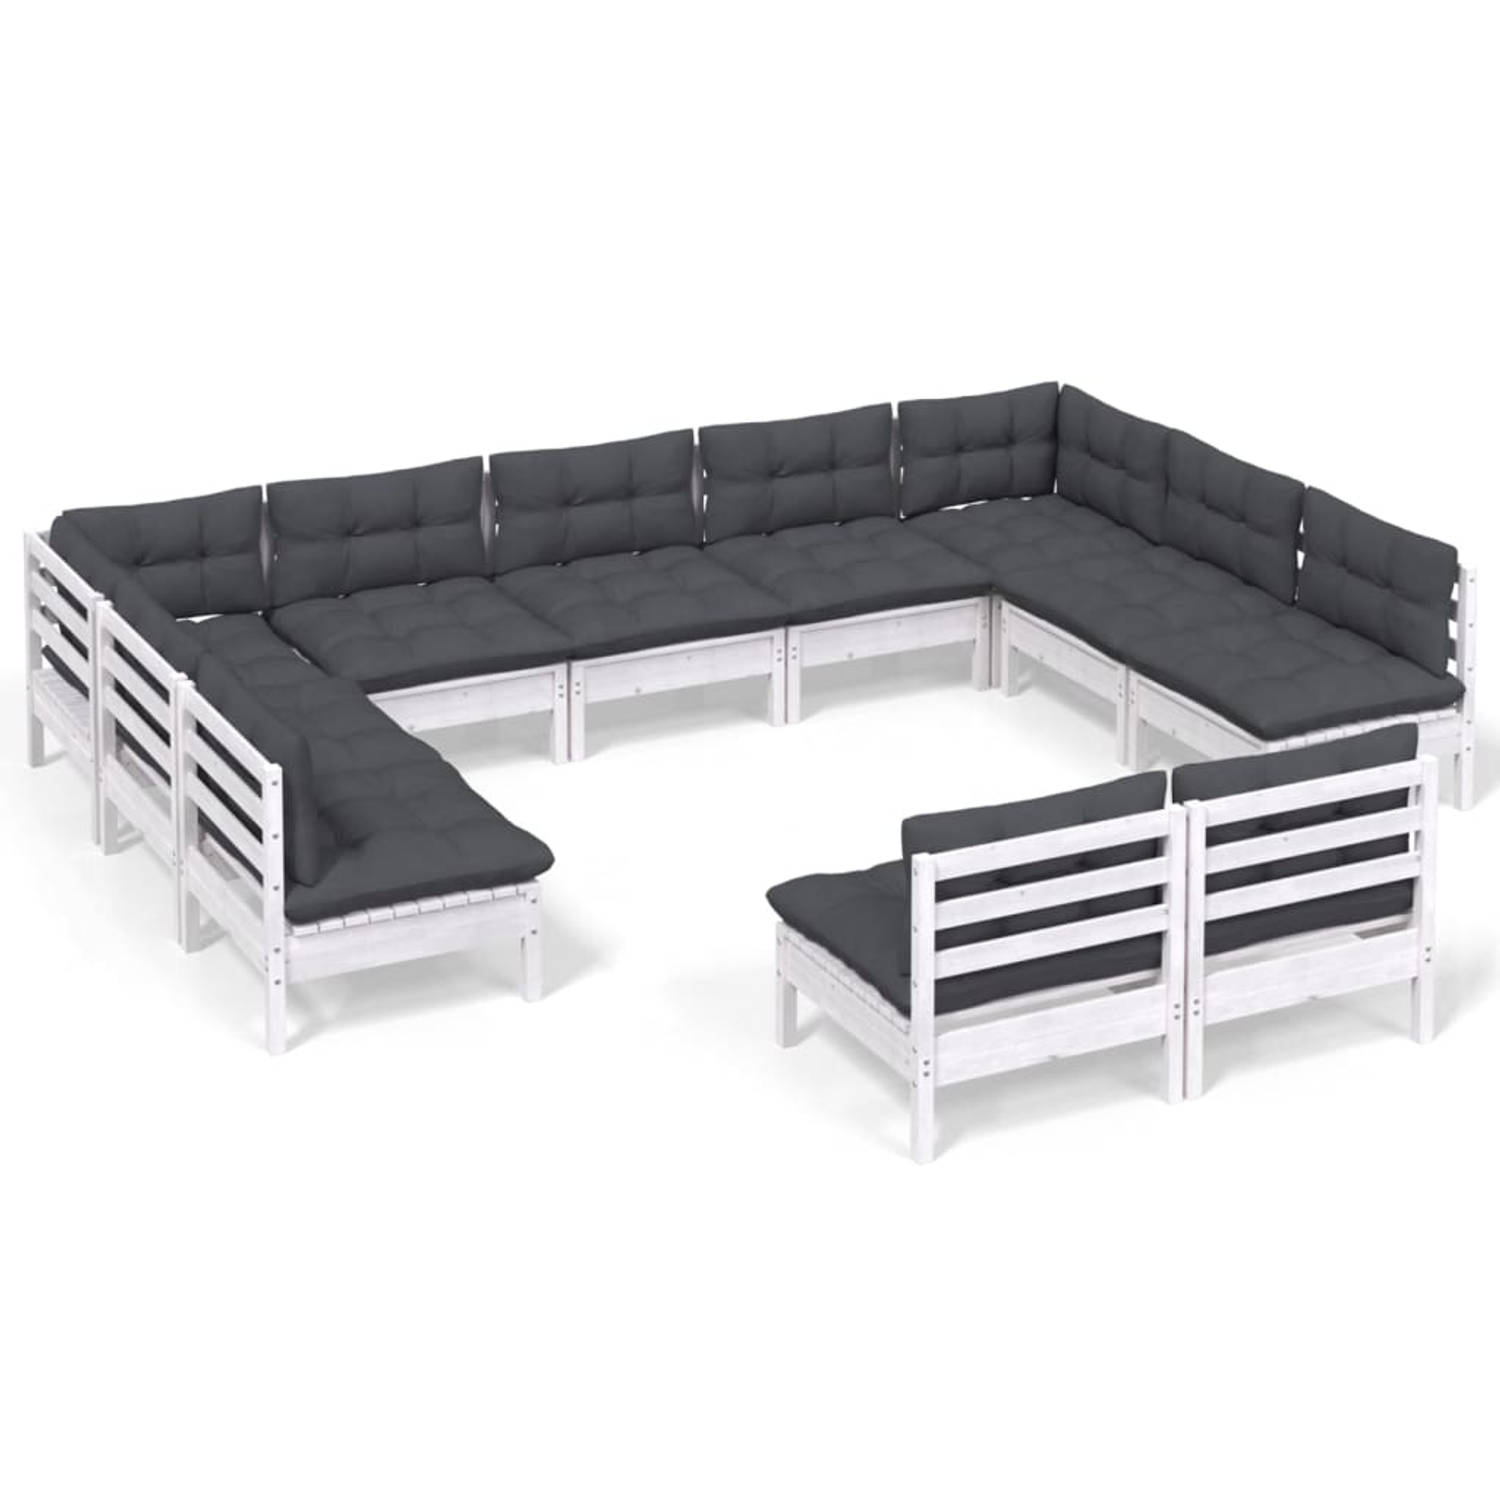 The Living Store Loungeset Grenenhout - Wit - 63.5x63.5x62.5 cm - Inclusief kussens - Montage vereist